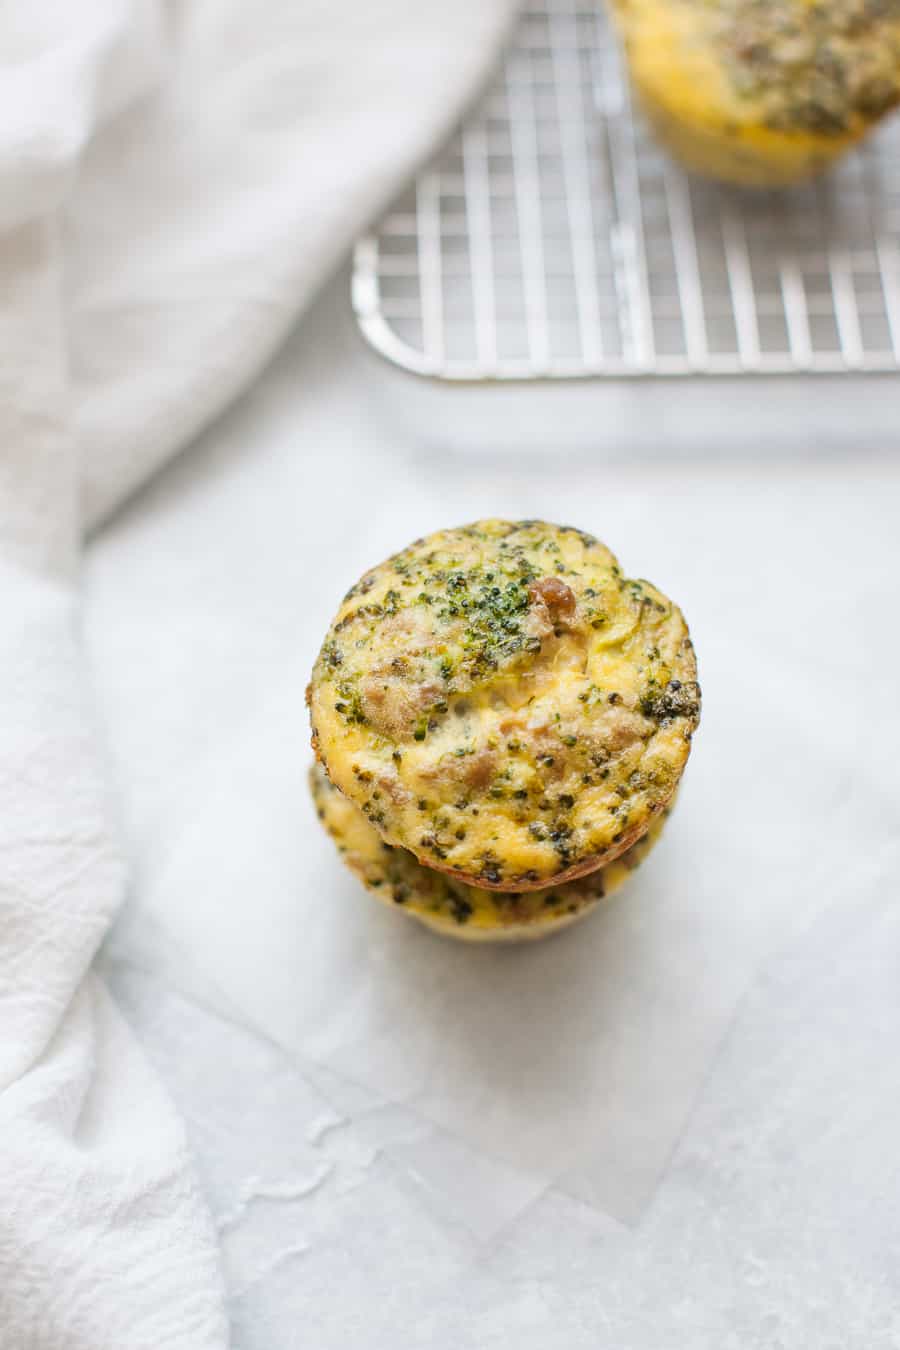 Looking for a make ahead breakfast that you can meal prep for this week? These Turkey Broccoli Egg Frittata Muffins are the solution. Packed with flavor and protein, these muffins are so quick to make ahead and have ready to go.?